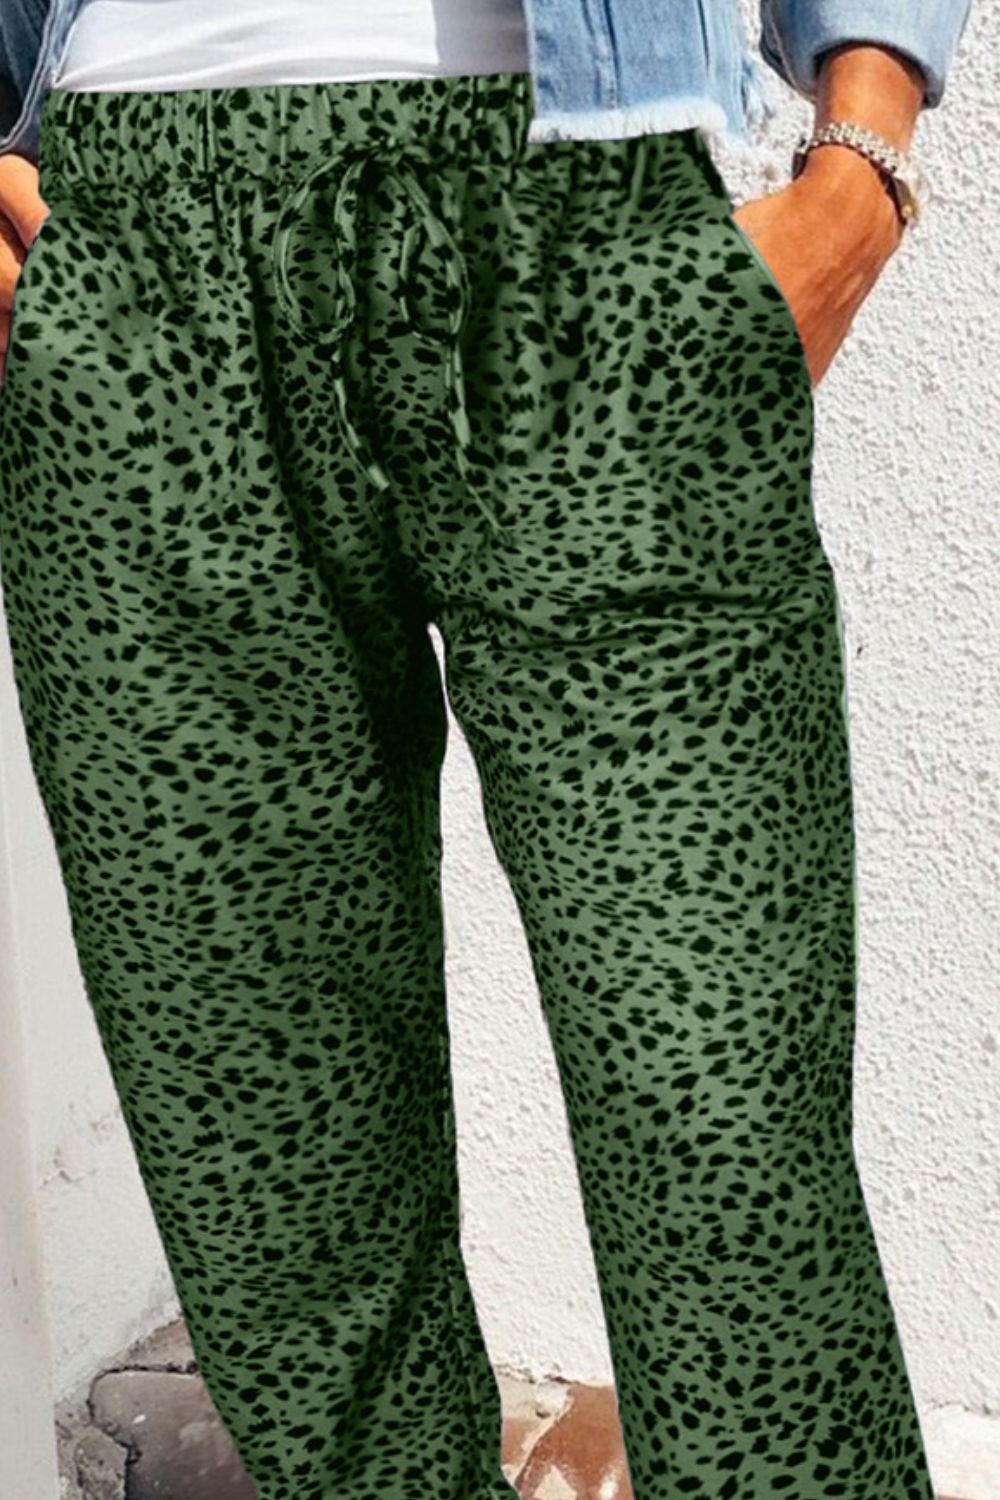 Trendsi Cupid Beauty Supplies Women Pants Double Take Leopard Print Joggers with Pockets